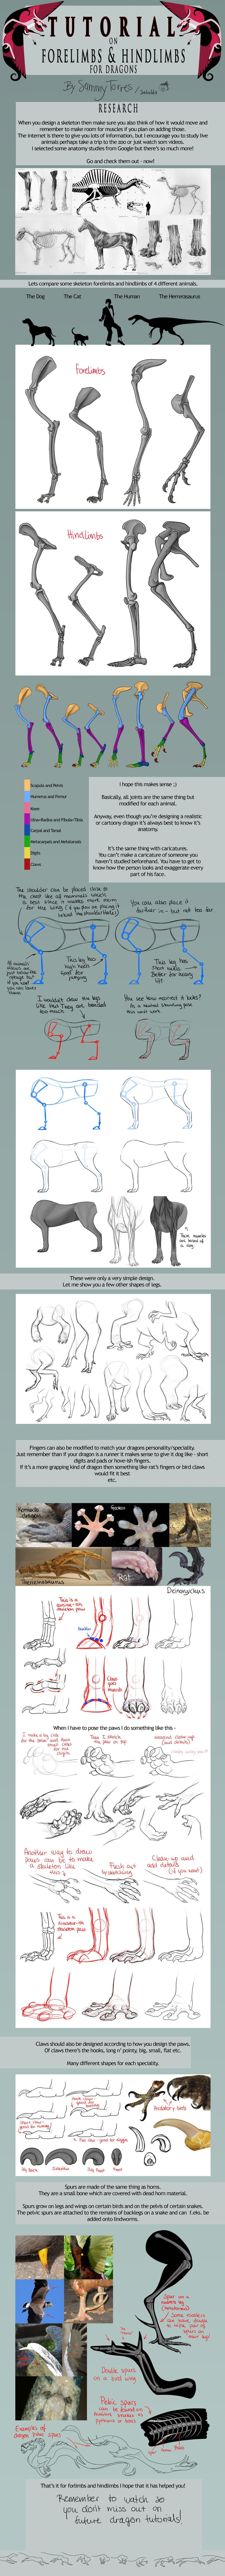 TUTORIAL: Forelimbs and Hindlimbs for Dragons by SammyTorres on deviantART